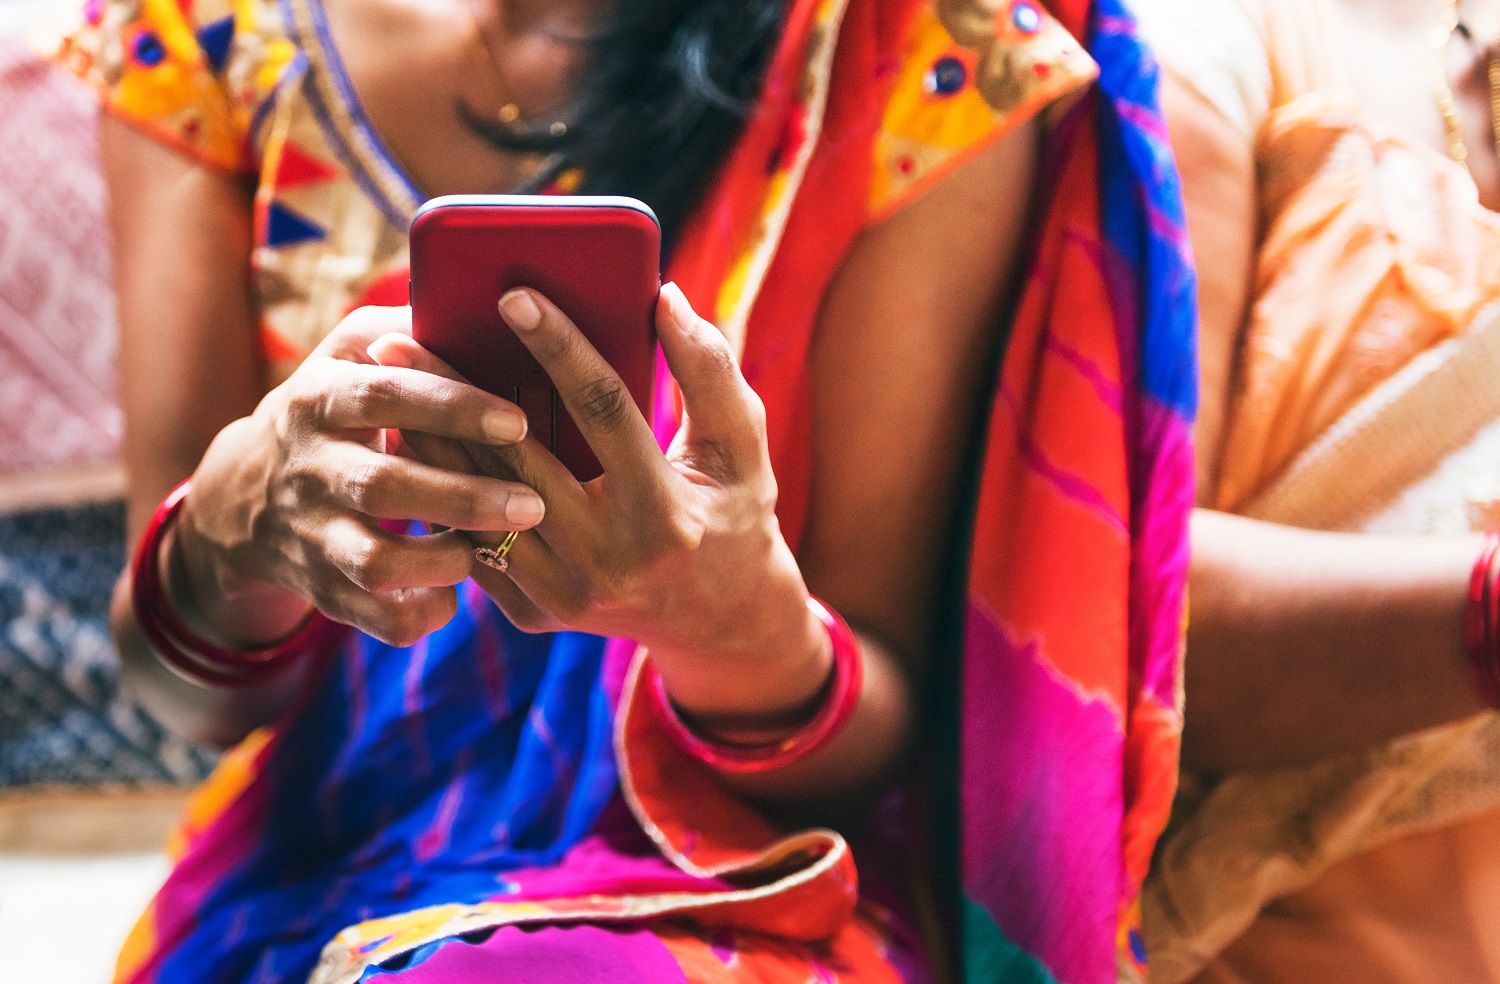 Image of woman from Southeastern country using phone